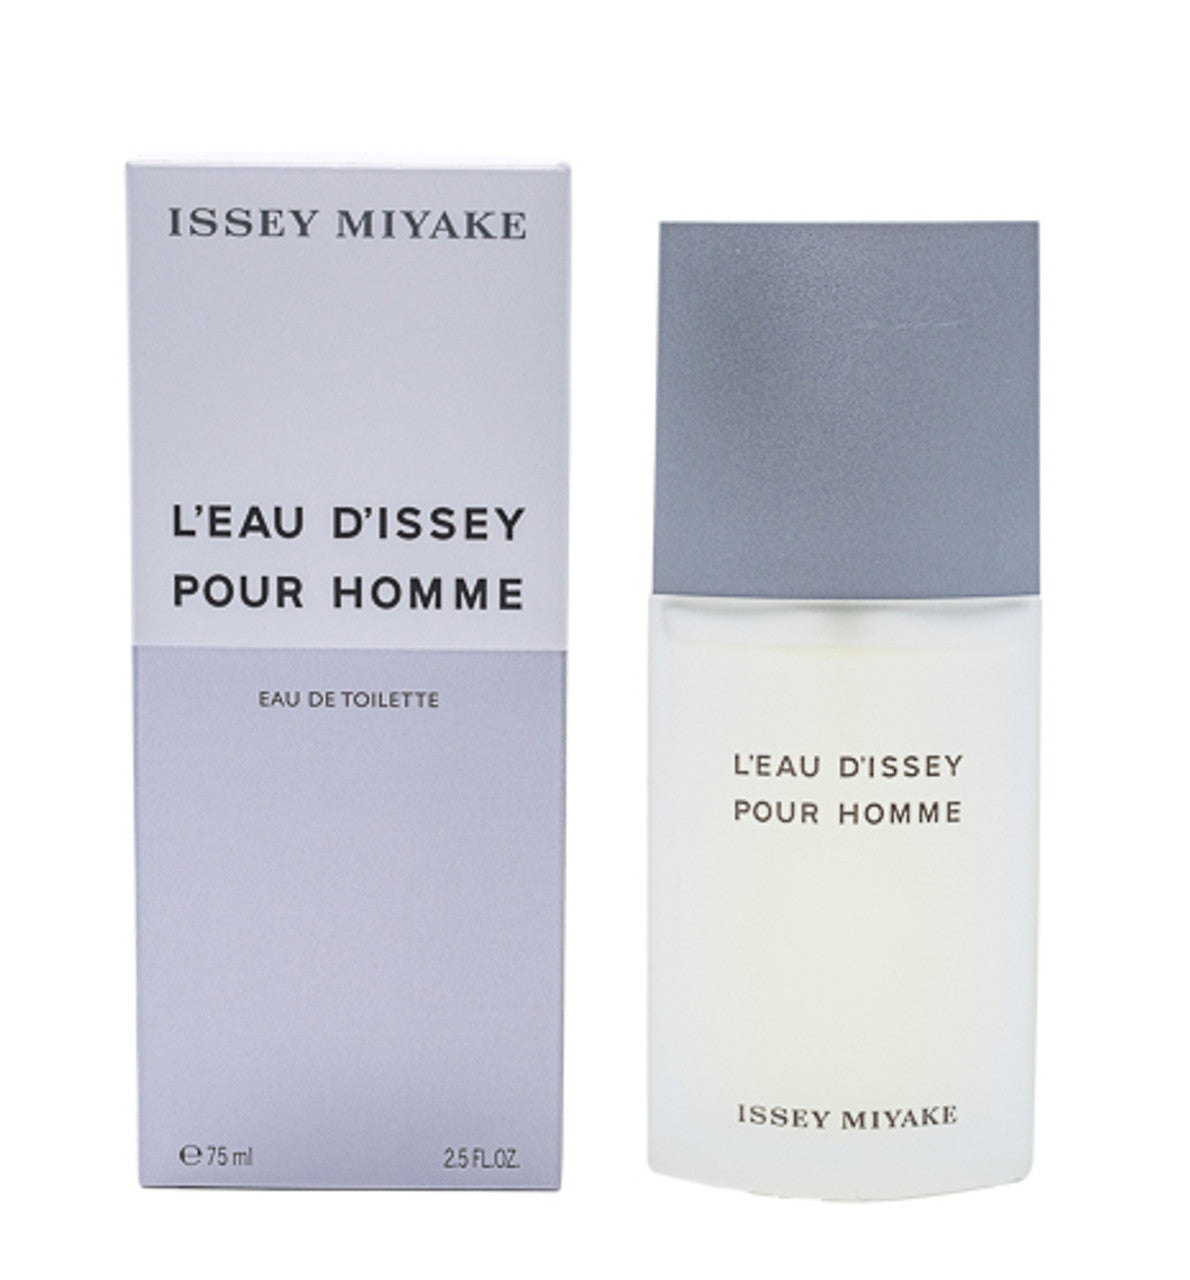 L'Eau D' Issey Pour Homme by Issey Miyake EDT Cologne for Men, 2.5 Oz